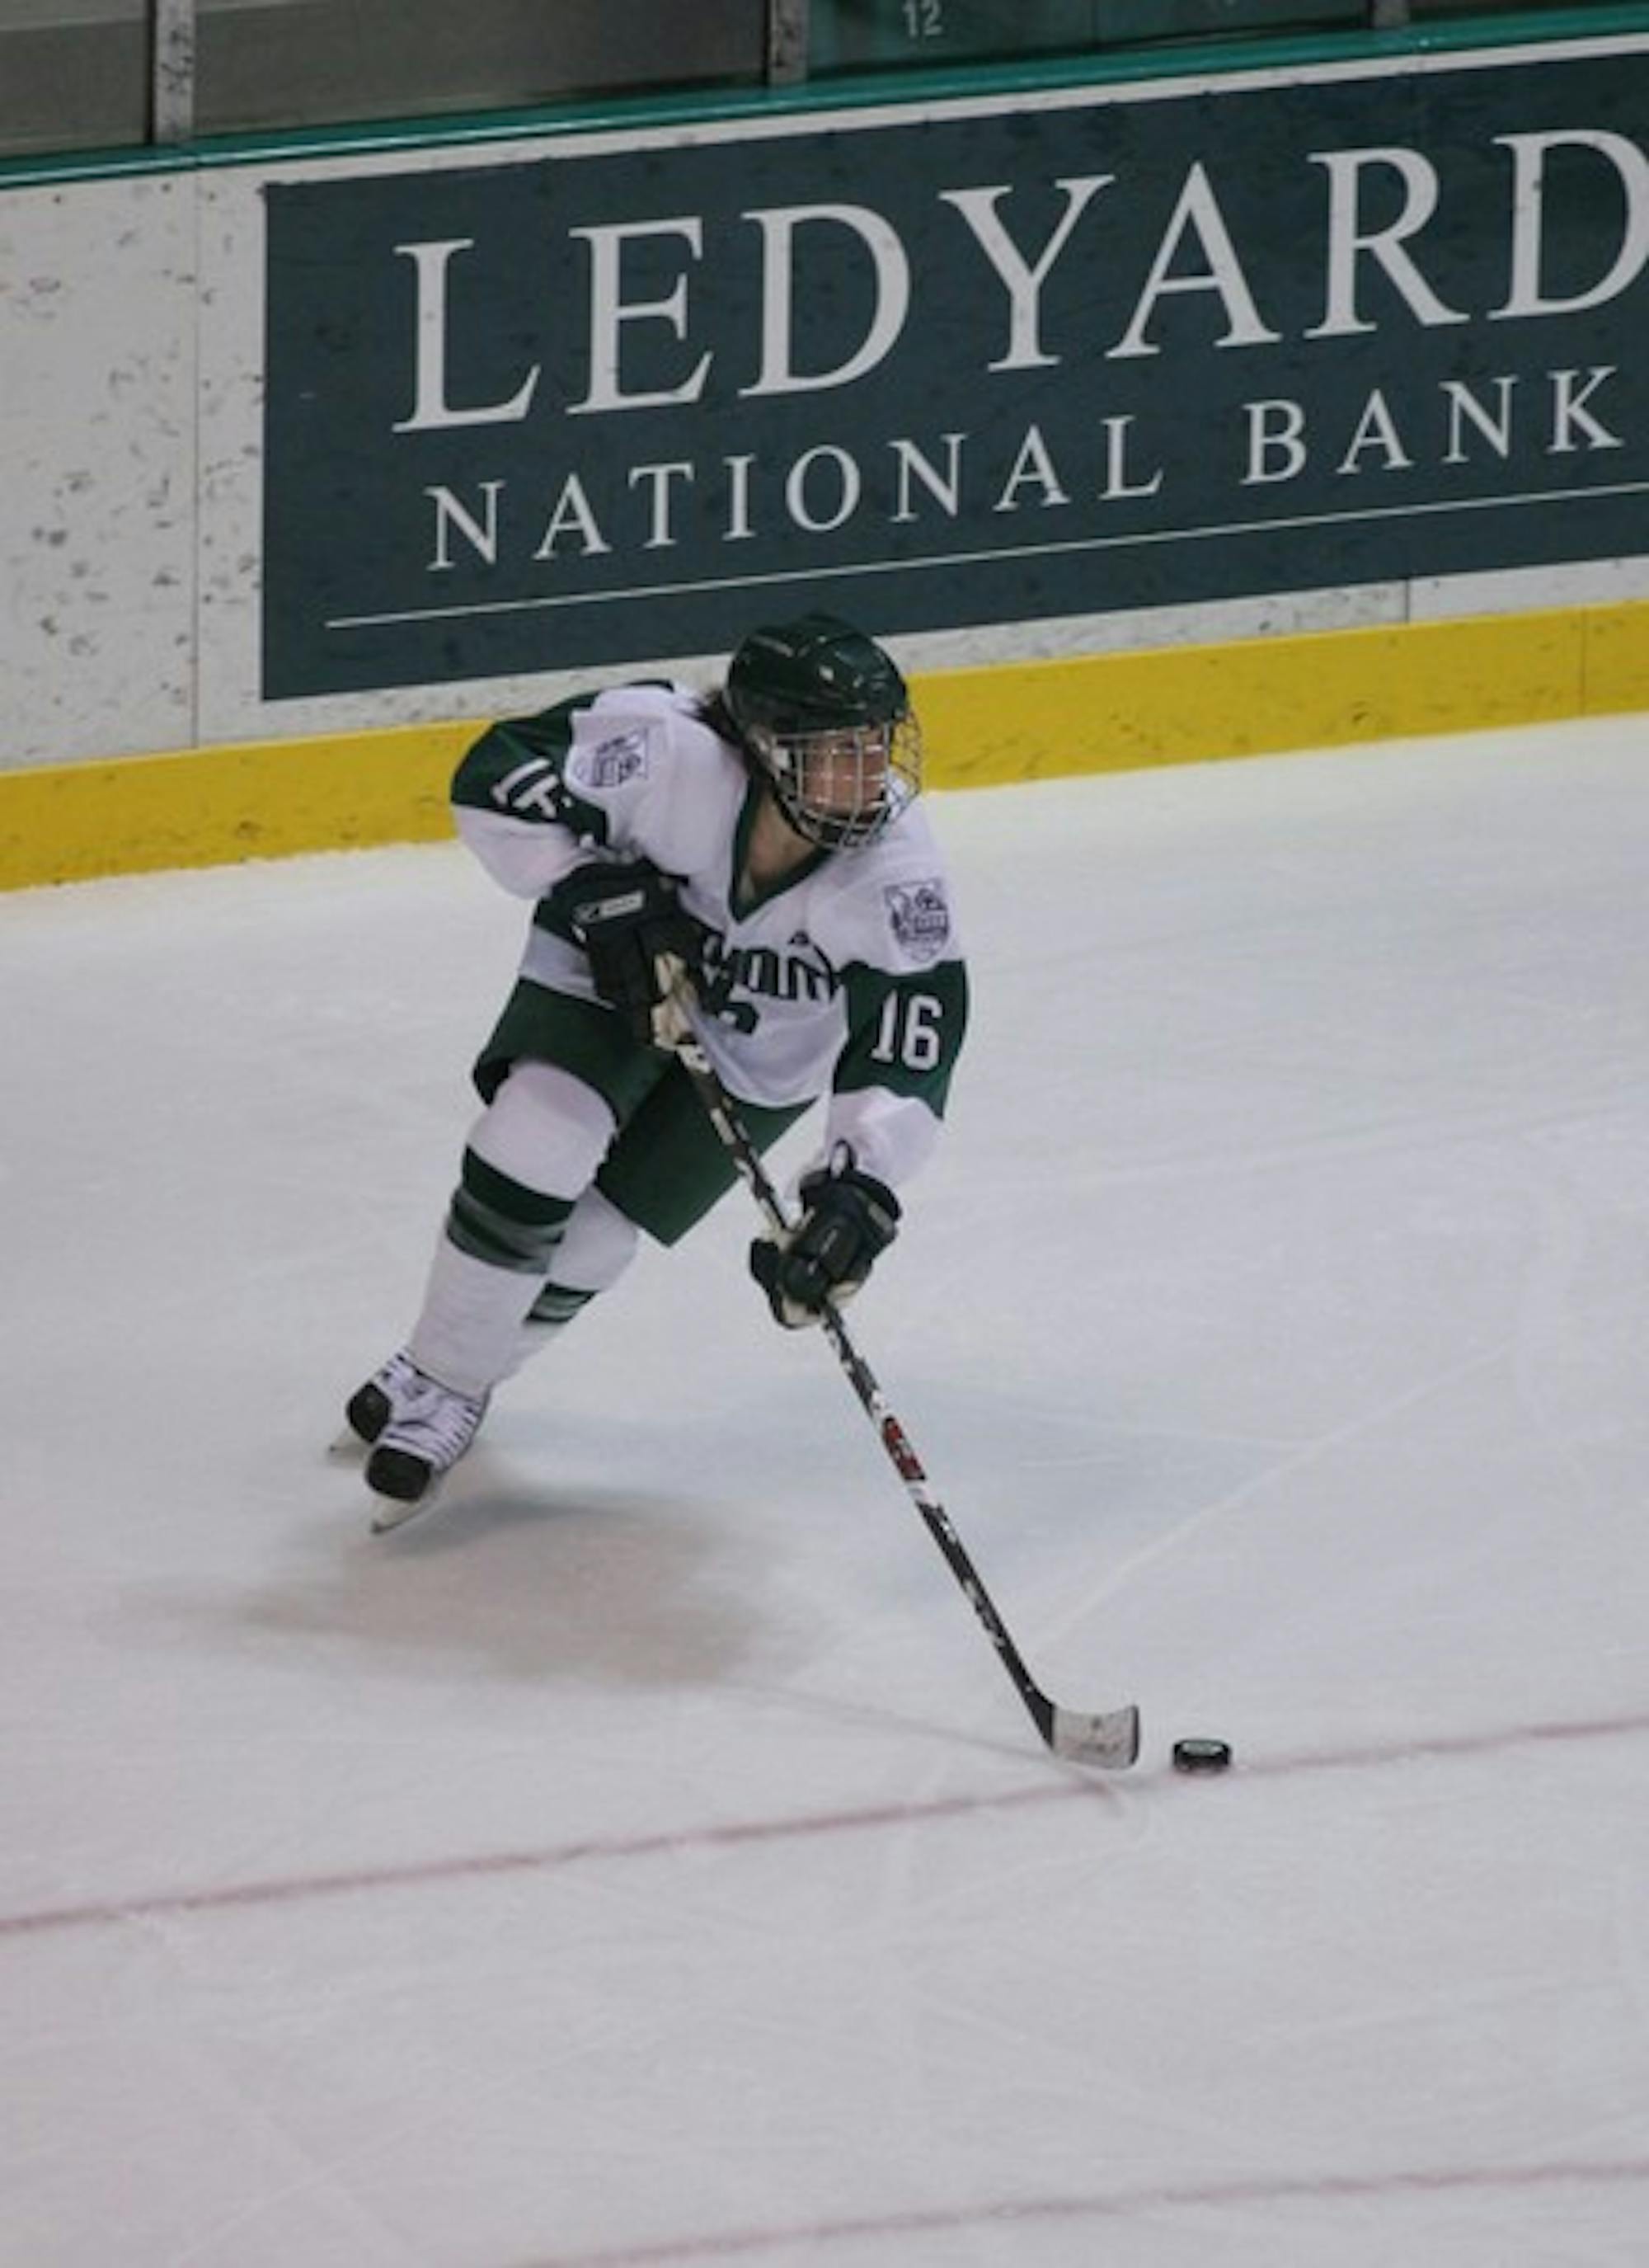 Forward Shannon Bowman '09 chipped in with two assists and six shots in the Big Green's 7-2 thrashing of Colgate on Saturday night in Thompson Arena.